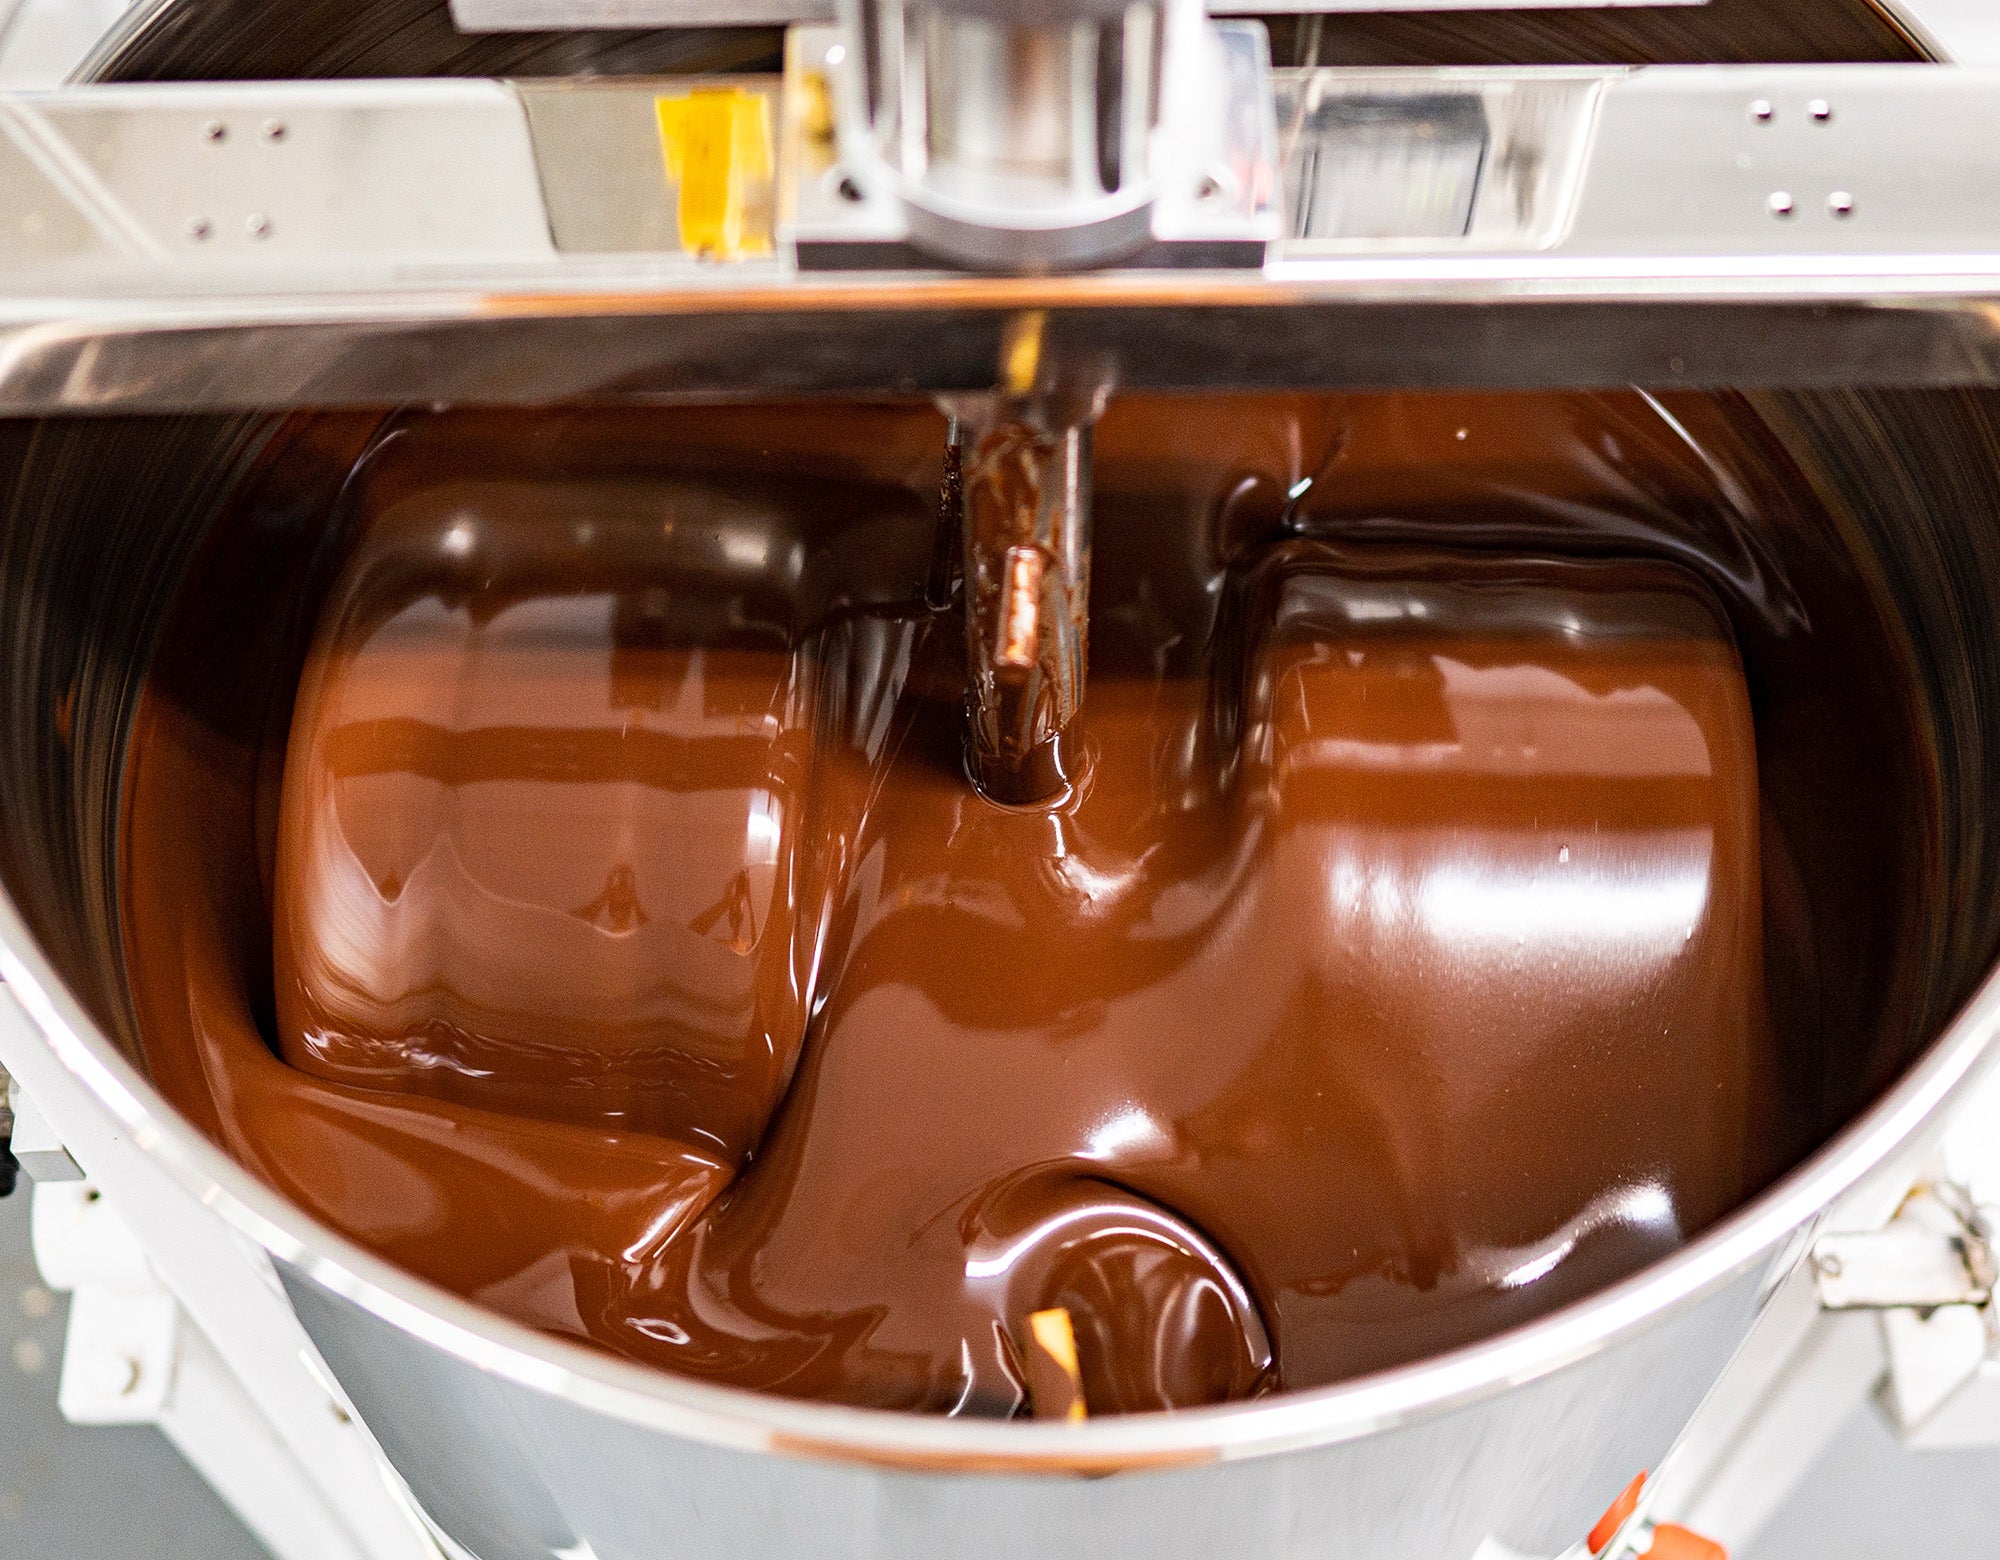 How Is Craft Chocolate Made?